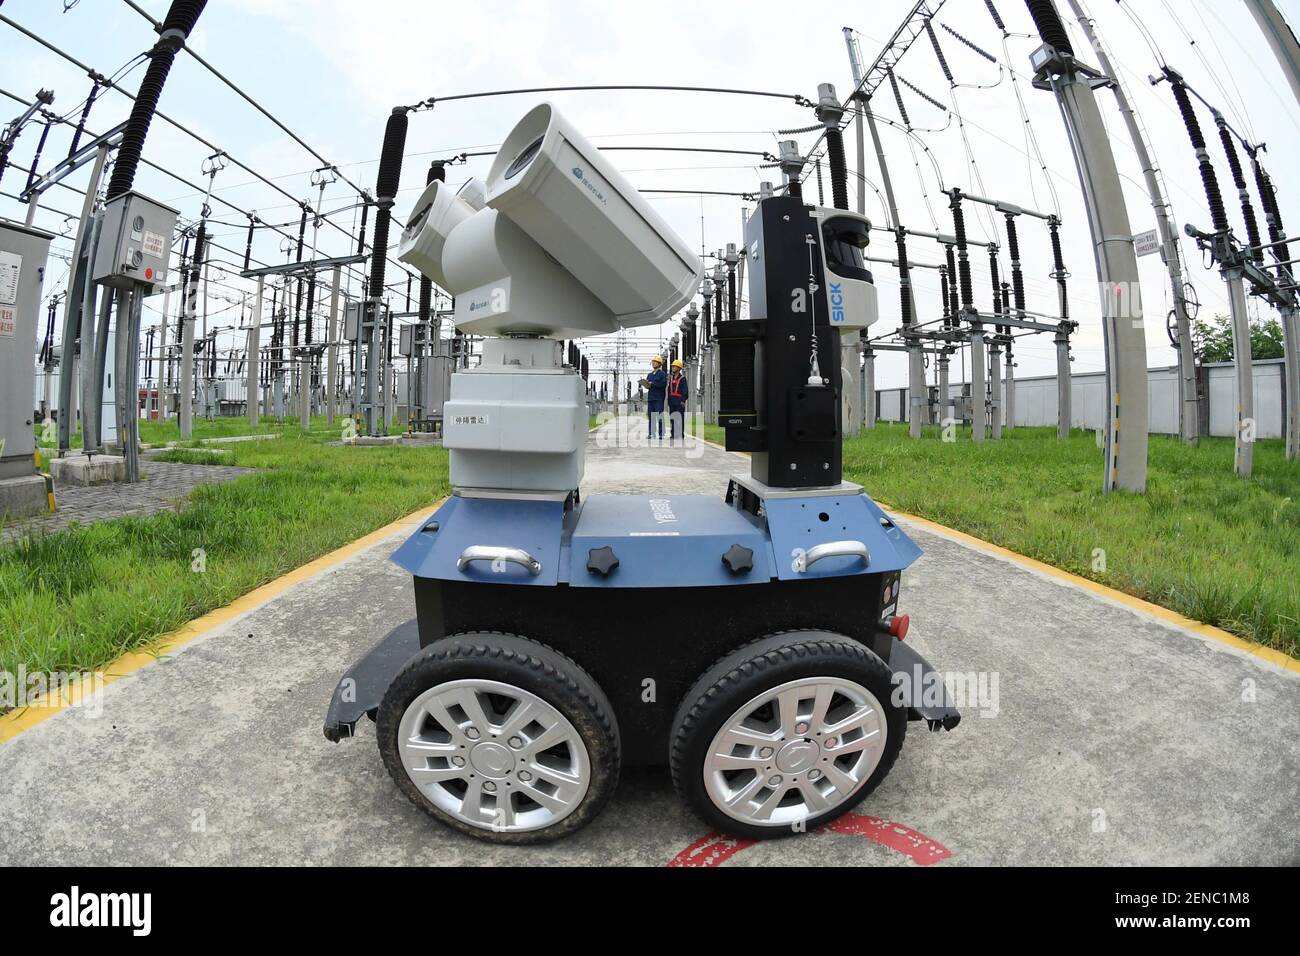 An intelligent inspection robot inspects the substation at 220 kv baoqiao  substation, Lai 'an county, Chuzhou city, Anhui province, July 23, 2019.The  robot integrates several devices, such as visible light camera and